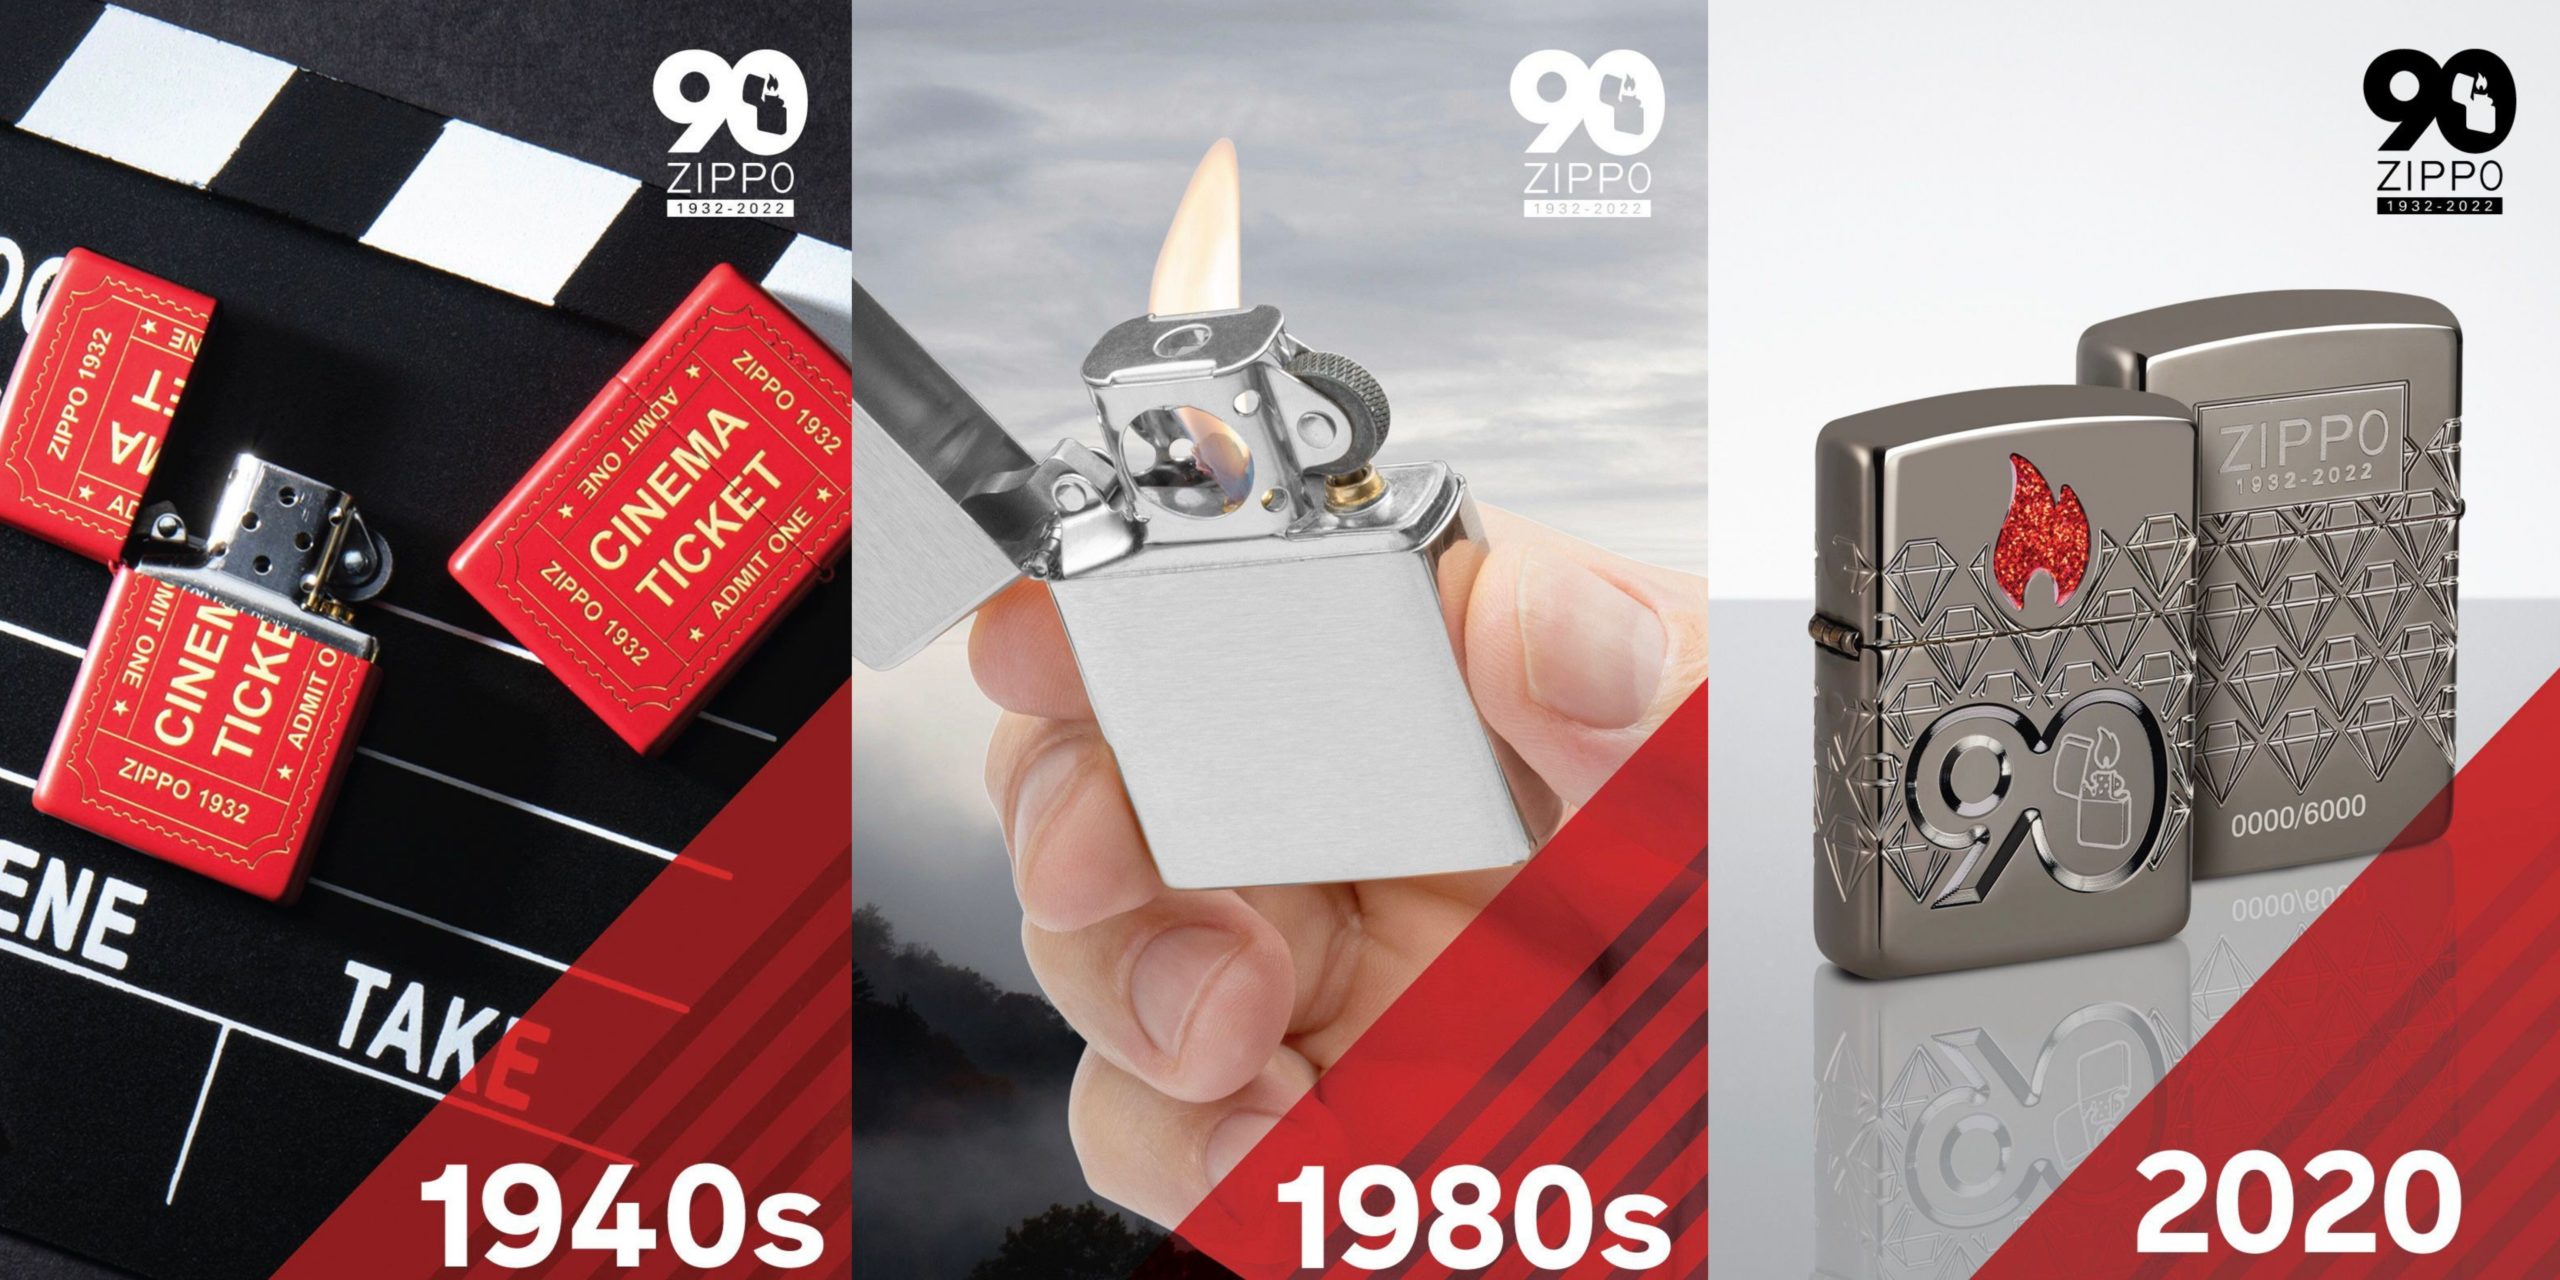 90 Decades of an Iconic Brand